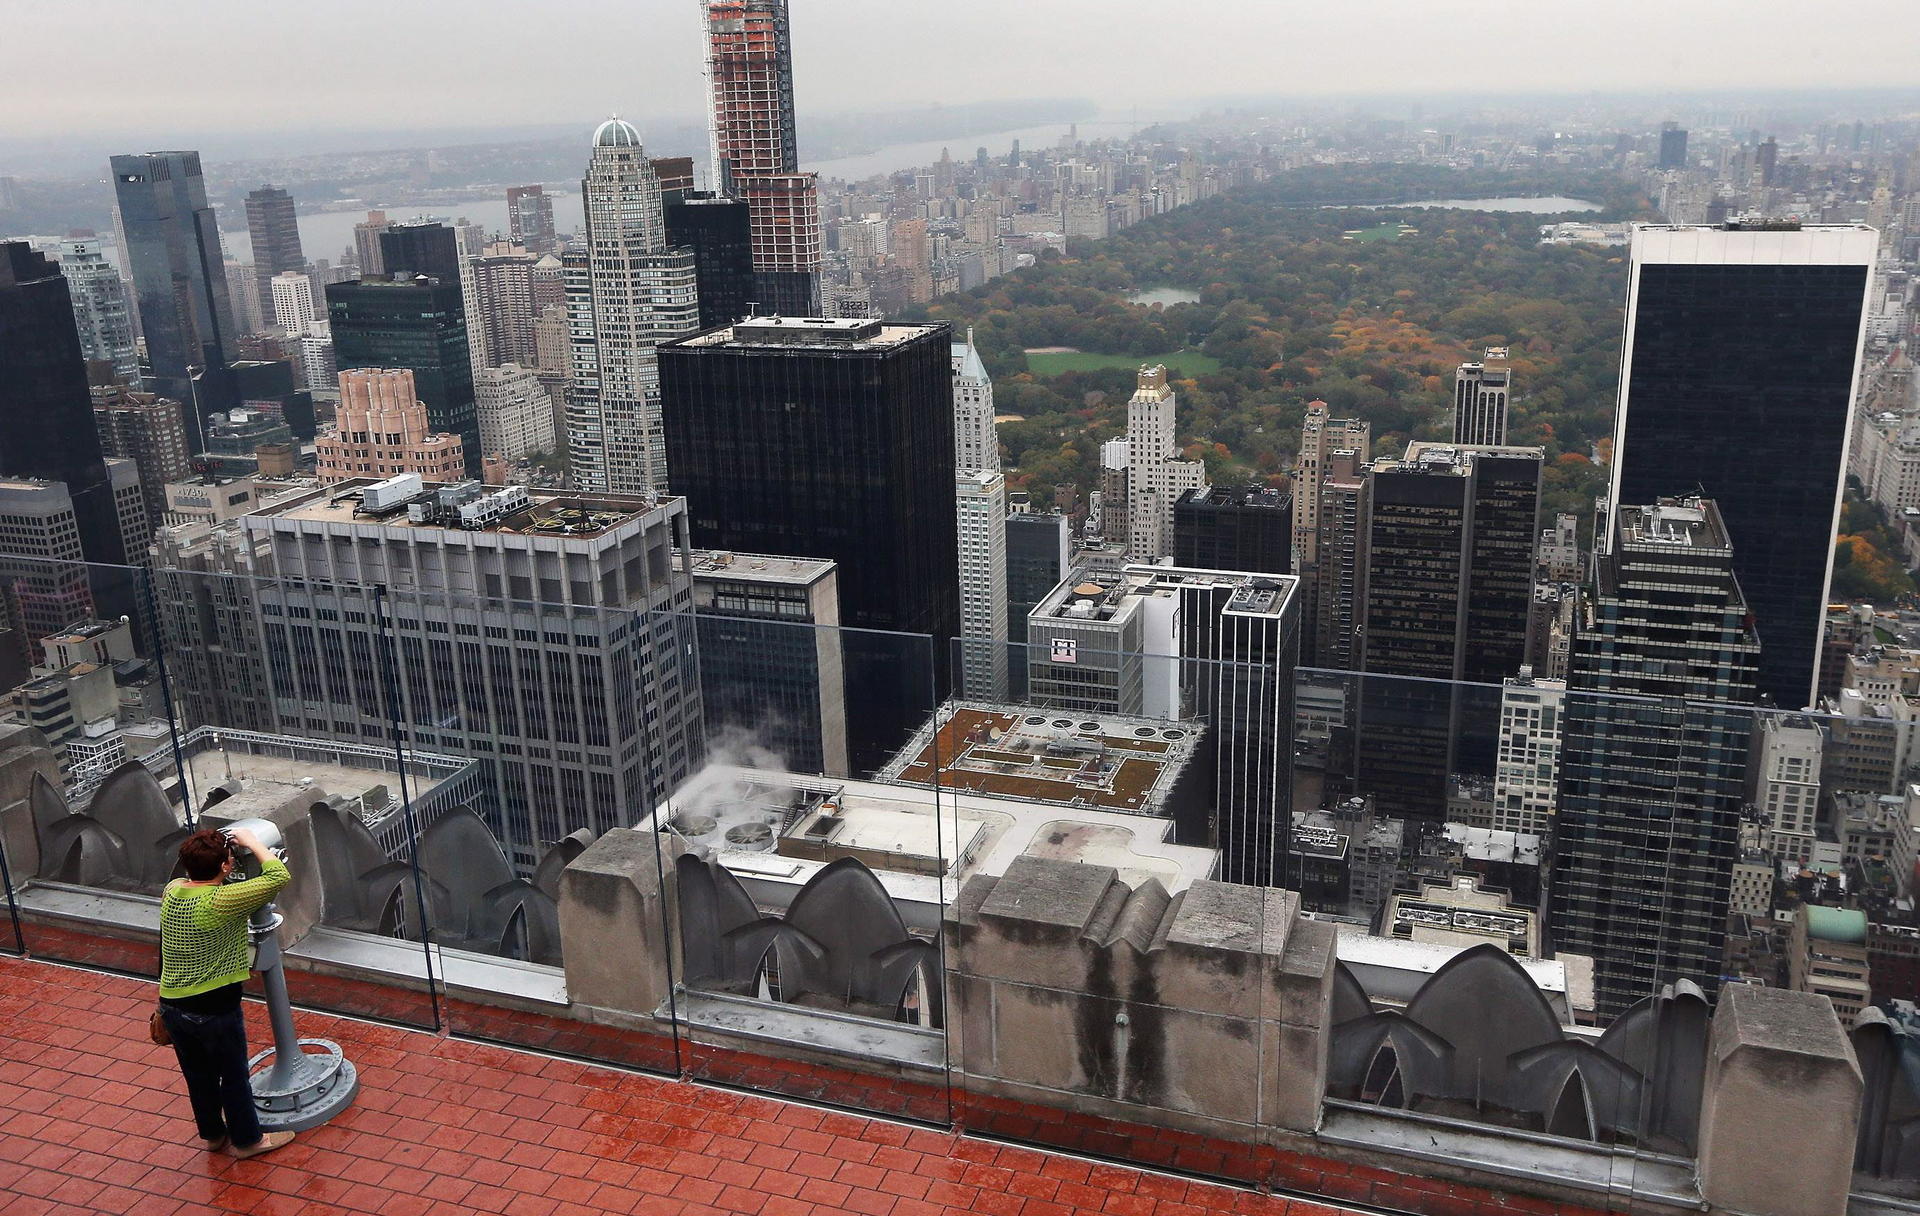 Buying property in countries such as the United States should no longer require approval. Photo: AFP